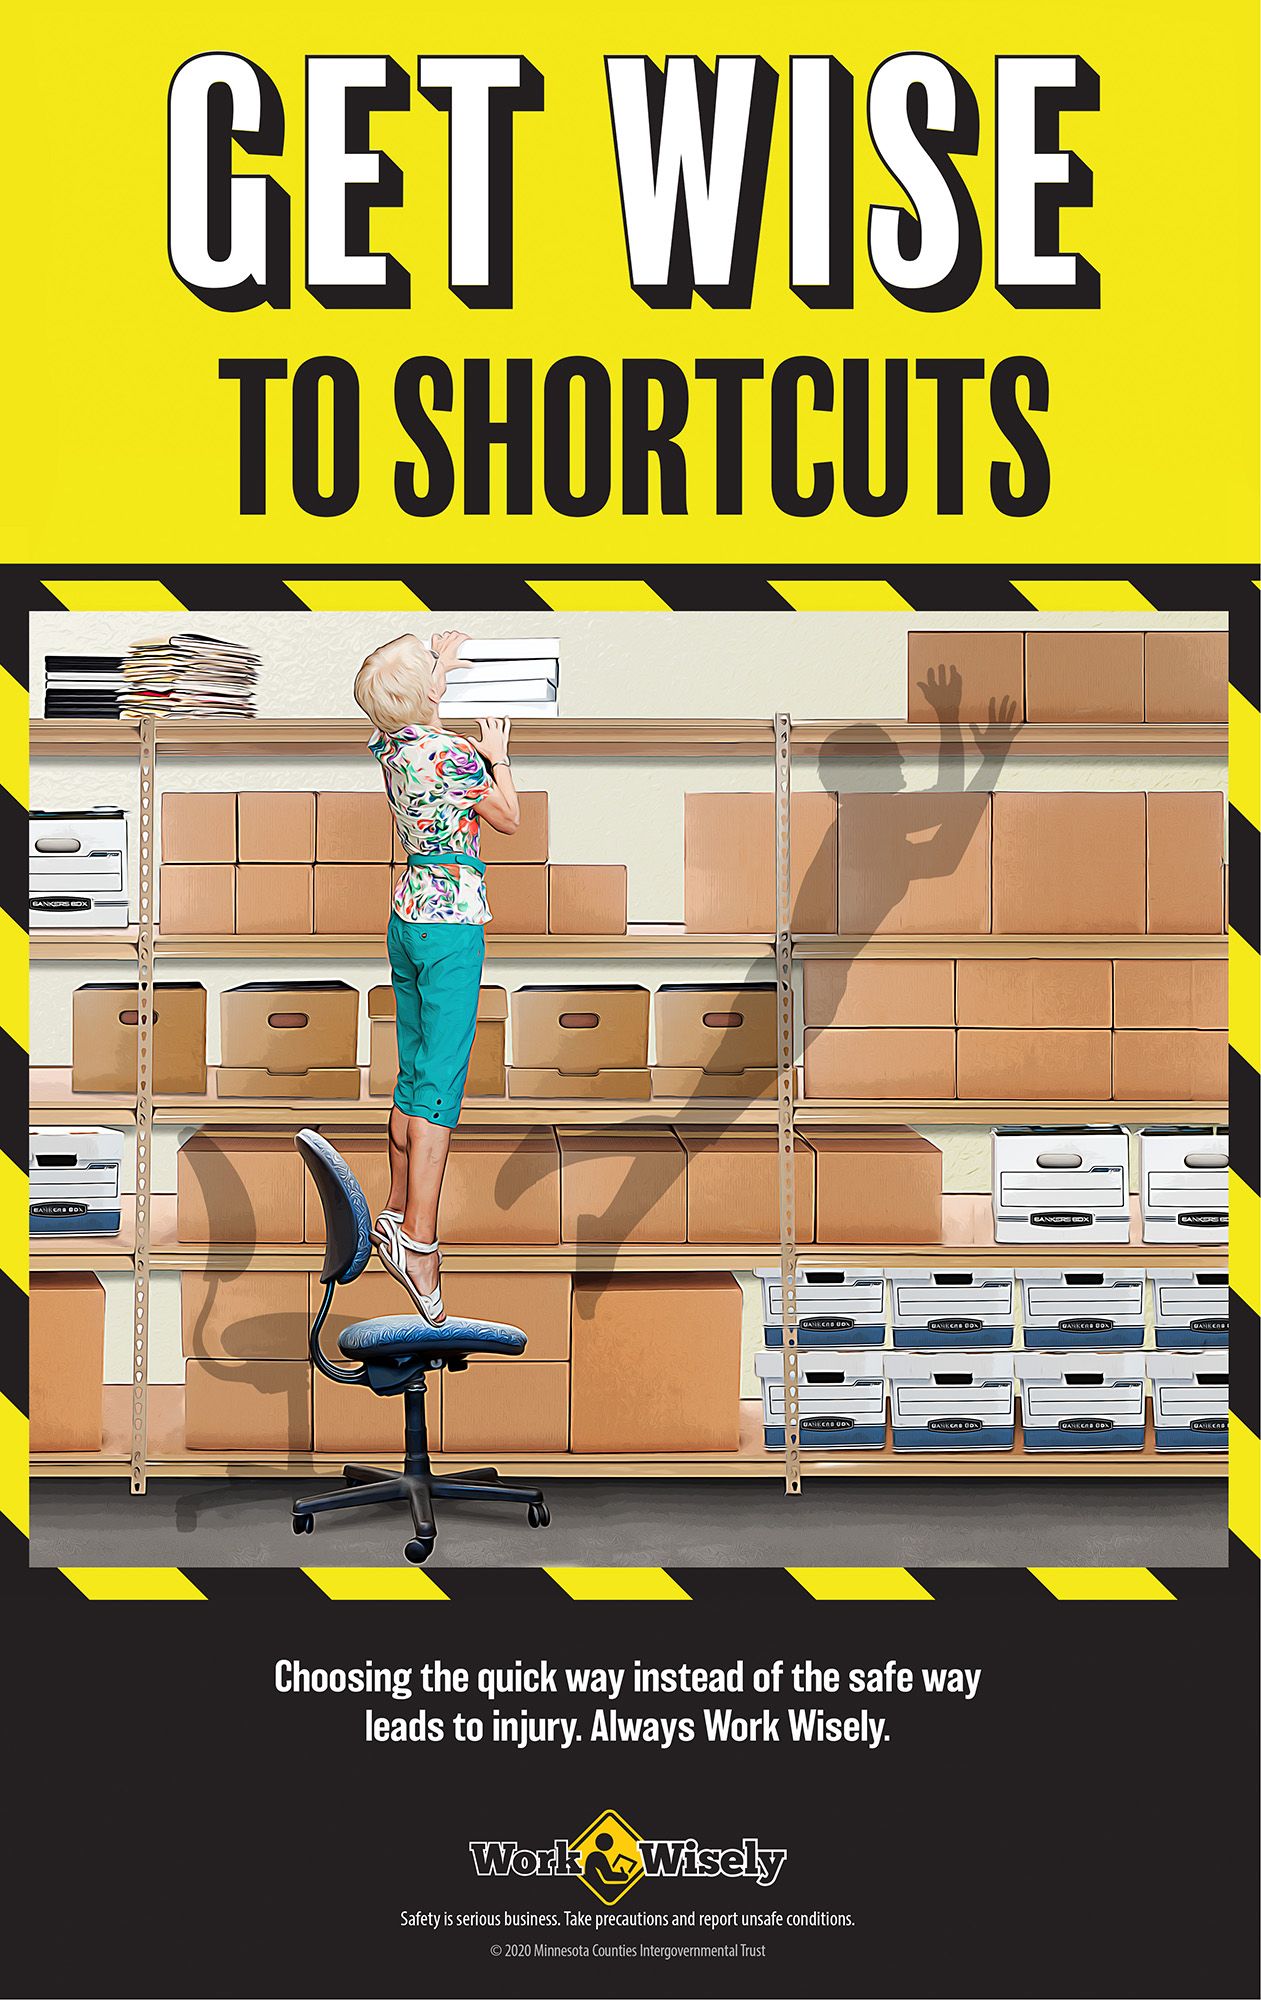 Get Wise to Shortcuts poster shows woman standing on tip toe on a rolling chair to reach a box on top shelf. Shadow shows woman falling off chair.